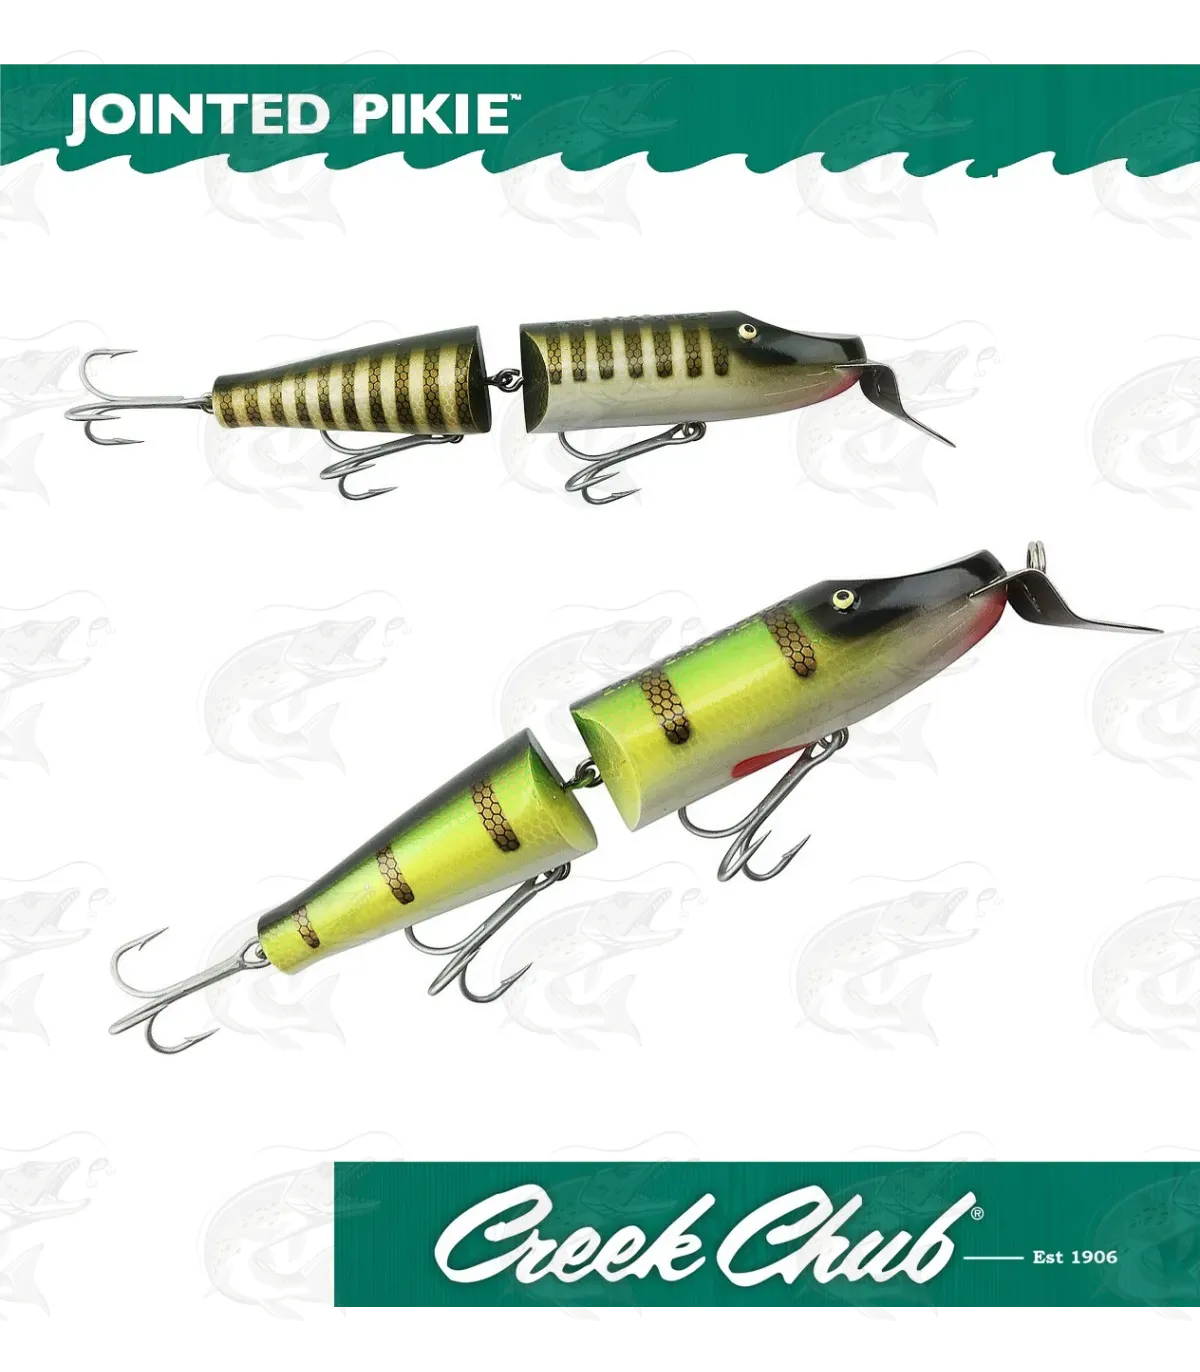  Creek Chub Jointed Pikie Fishing Lure for Large Bass, Striper,  Musky and Pike, Fishing Lures for Freshwater, 6, 1 3/4 oz, Perch,  (I3000PPE) : Fishing Topwater Lures And Crankbaits : Sports & Outdoors